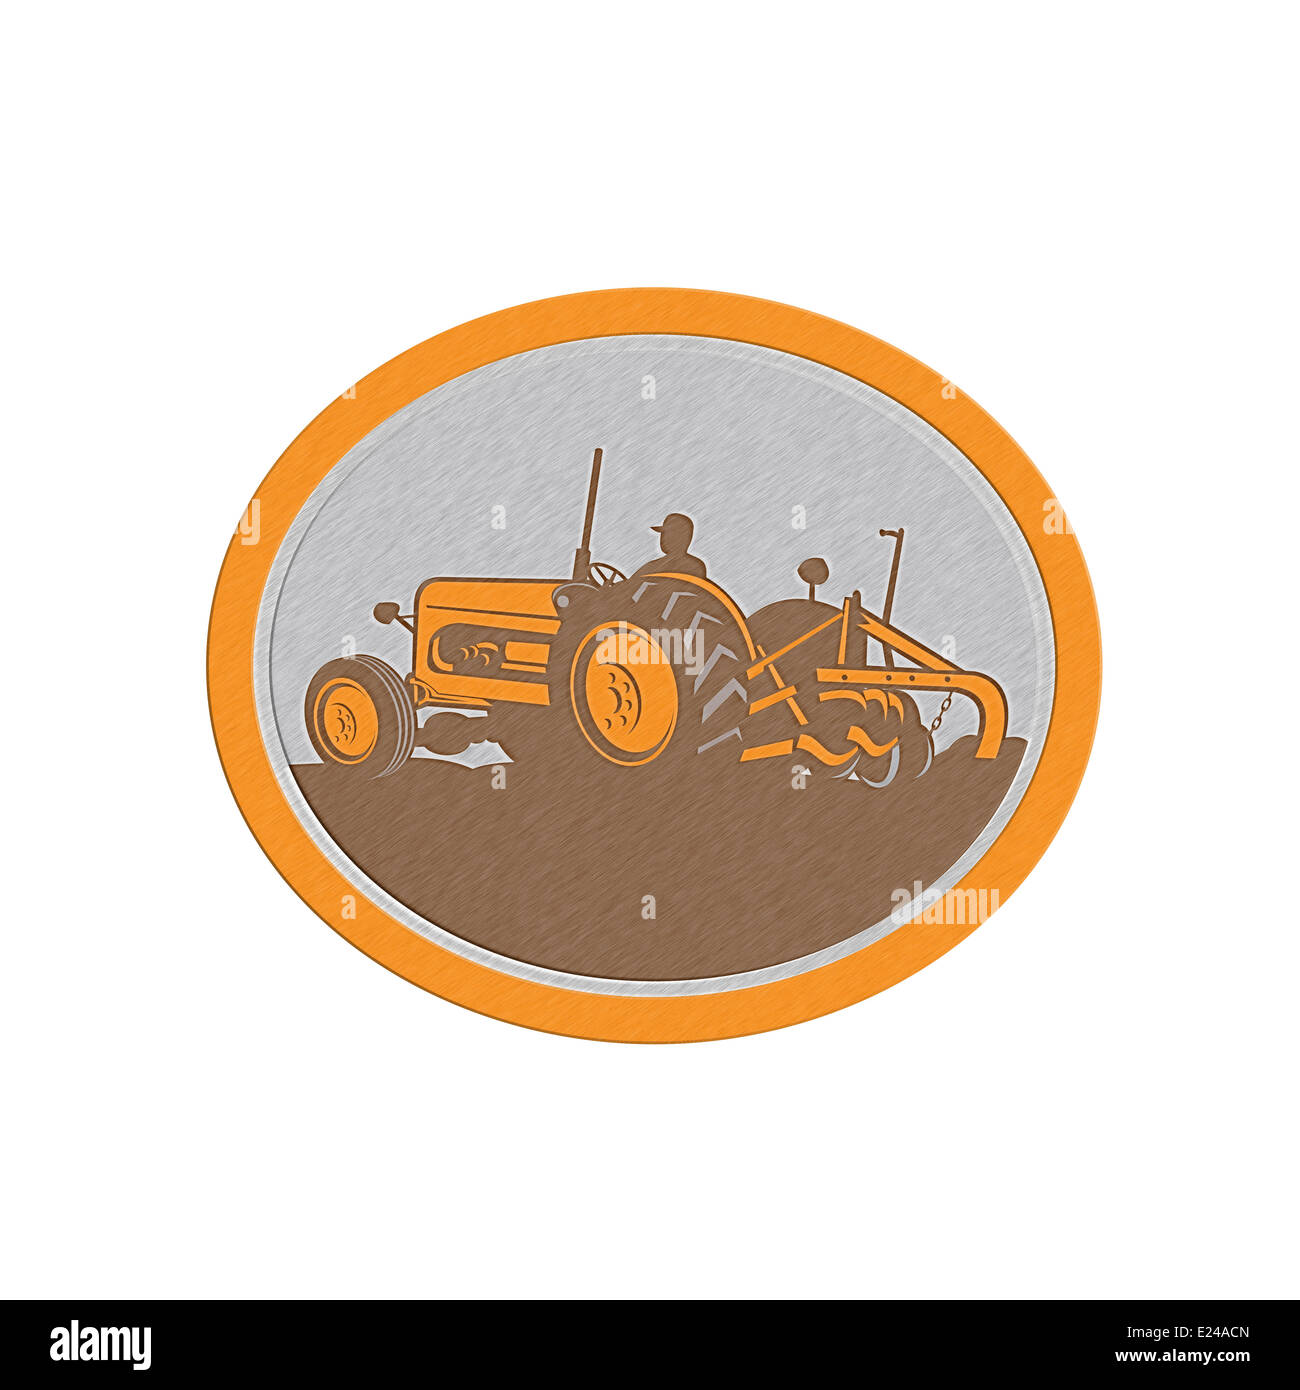 Metallic styled illustration of a vintage tractor with farmer driver plowing field sideview set inside an oval done in retro style on isolated background. Stock Photo